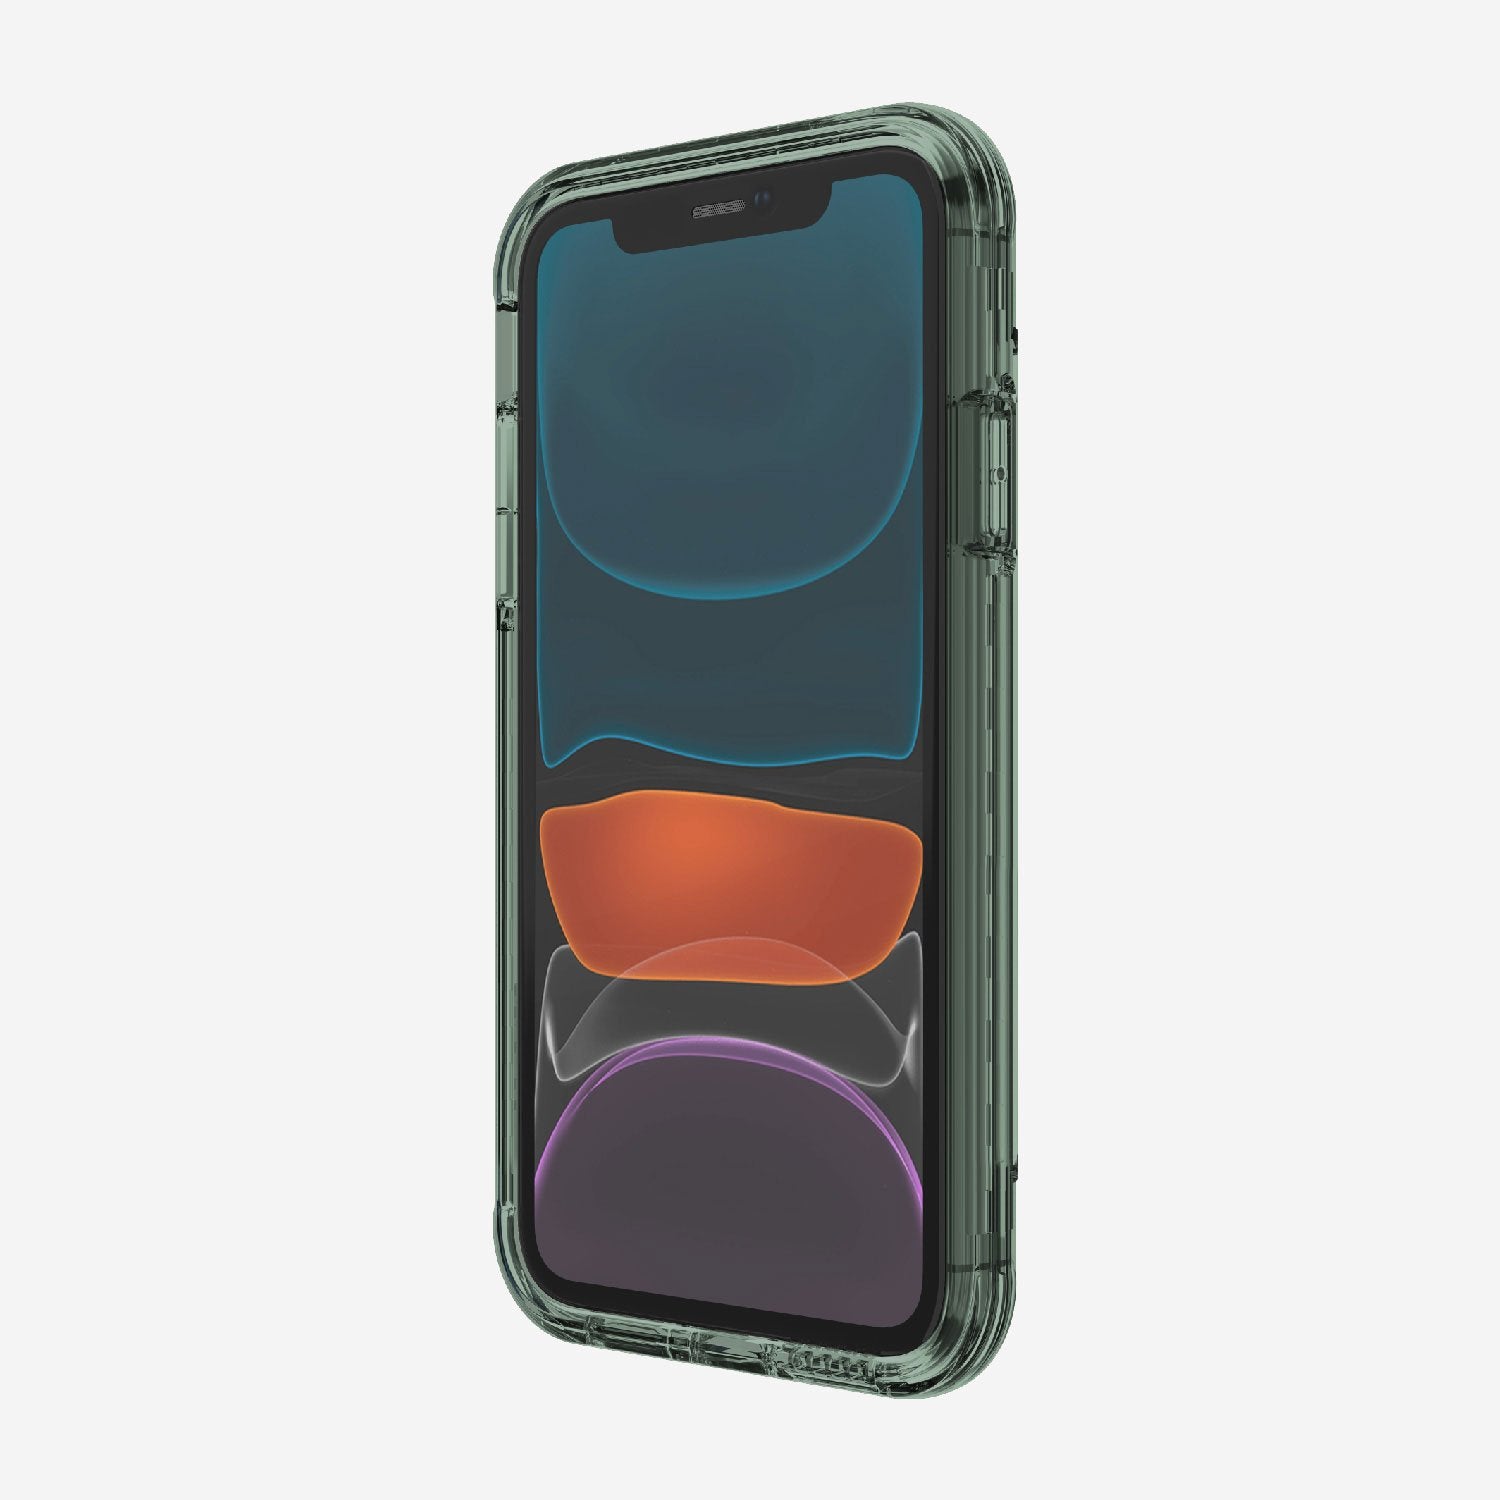 The back of a Raptic iPhone 11 Pro Max Case - AIR in green with 13 foot drop protection.